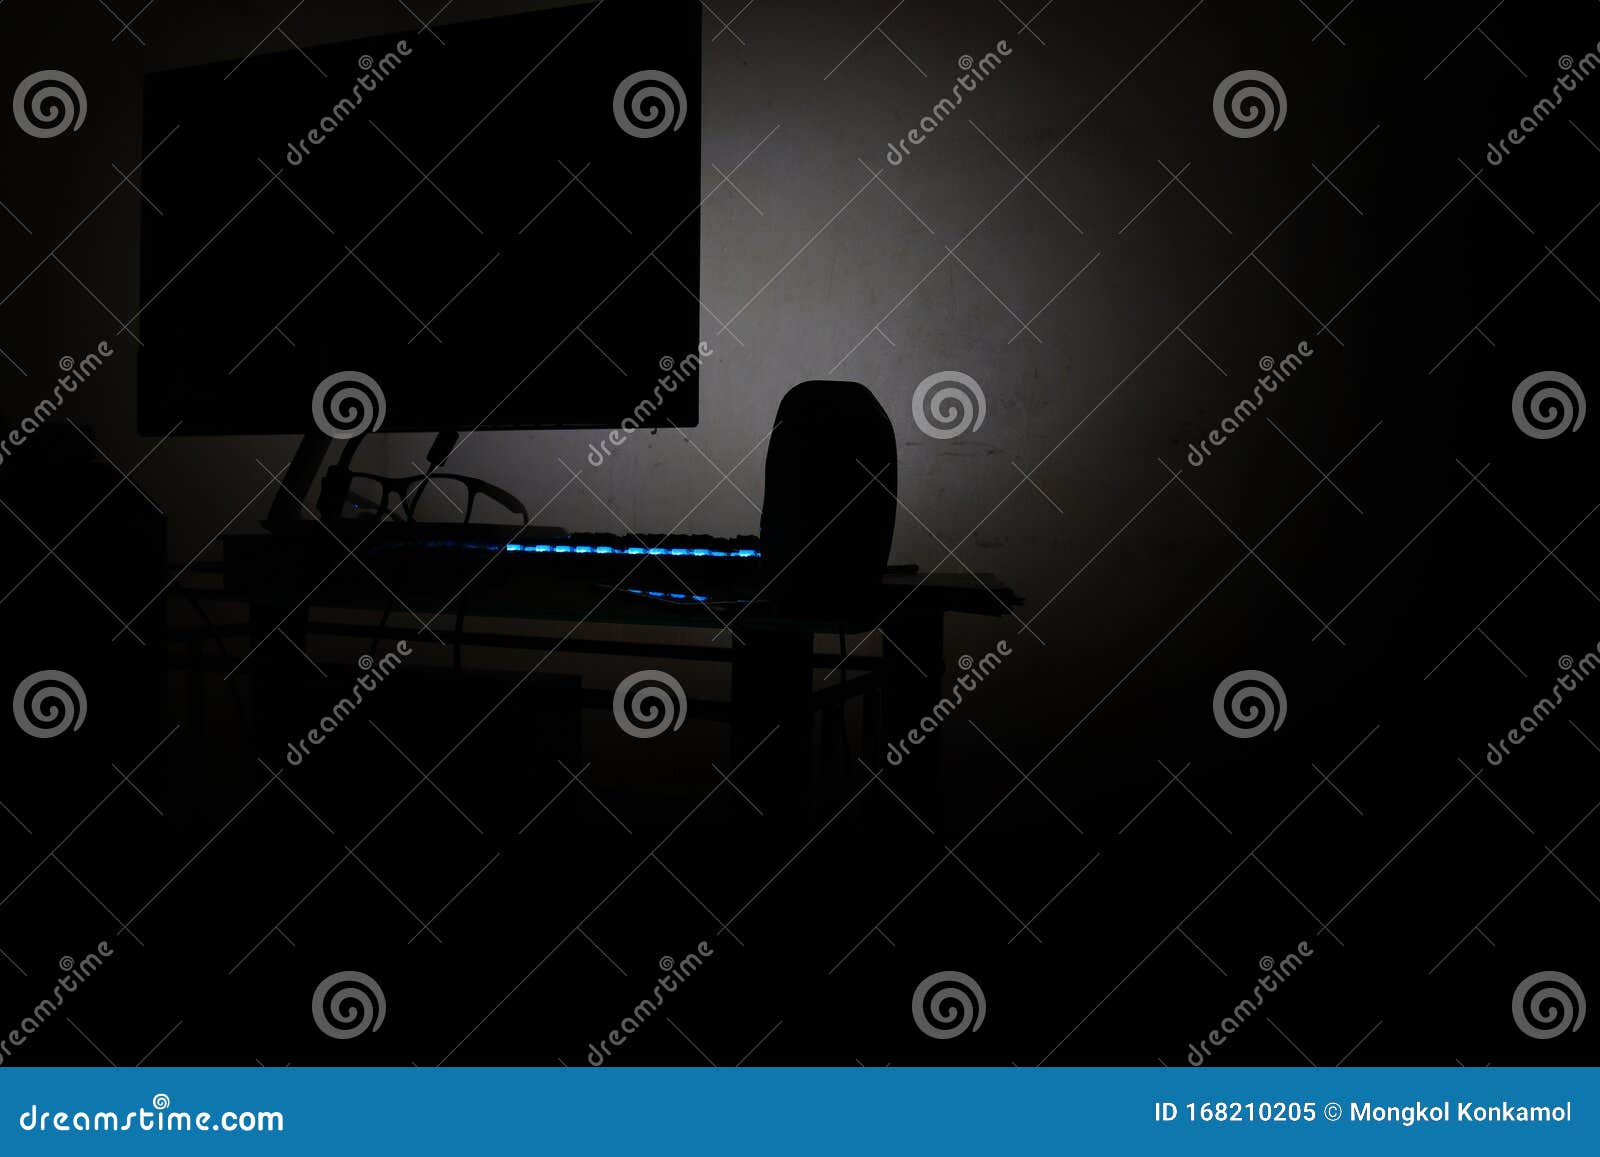 back view of computer in the dark room with blue led keybord and glasses and speaker, no people, not focused in picture